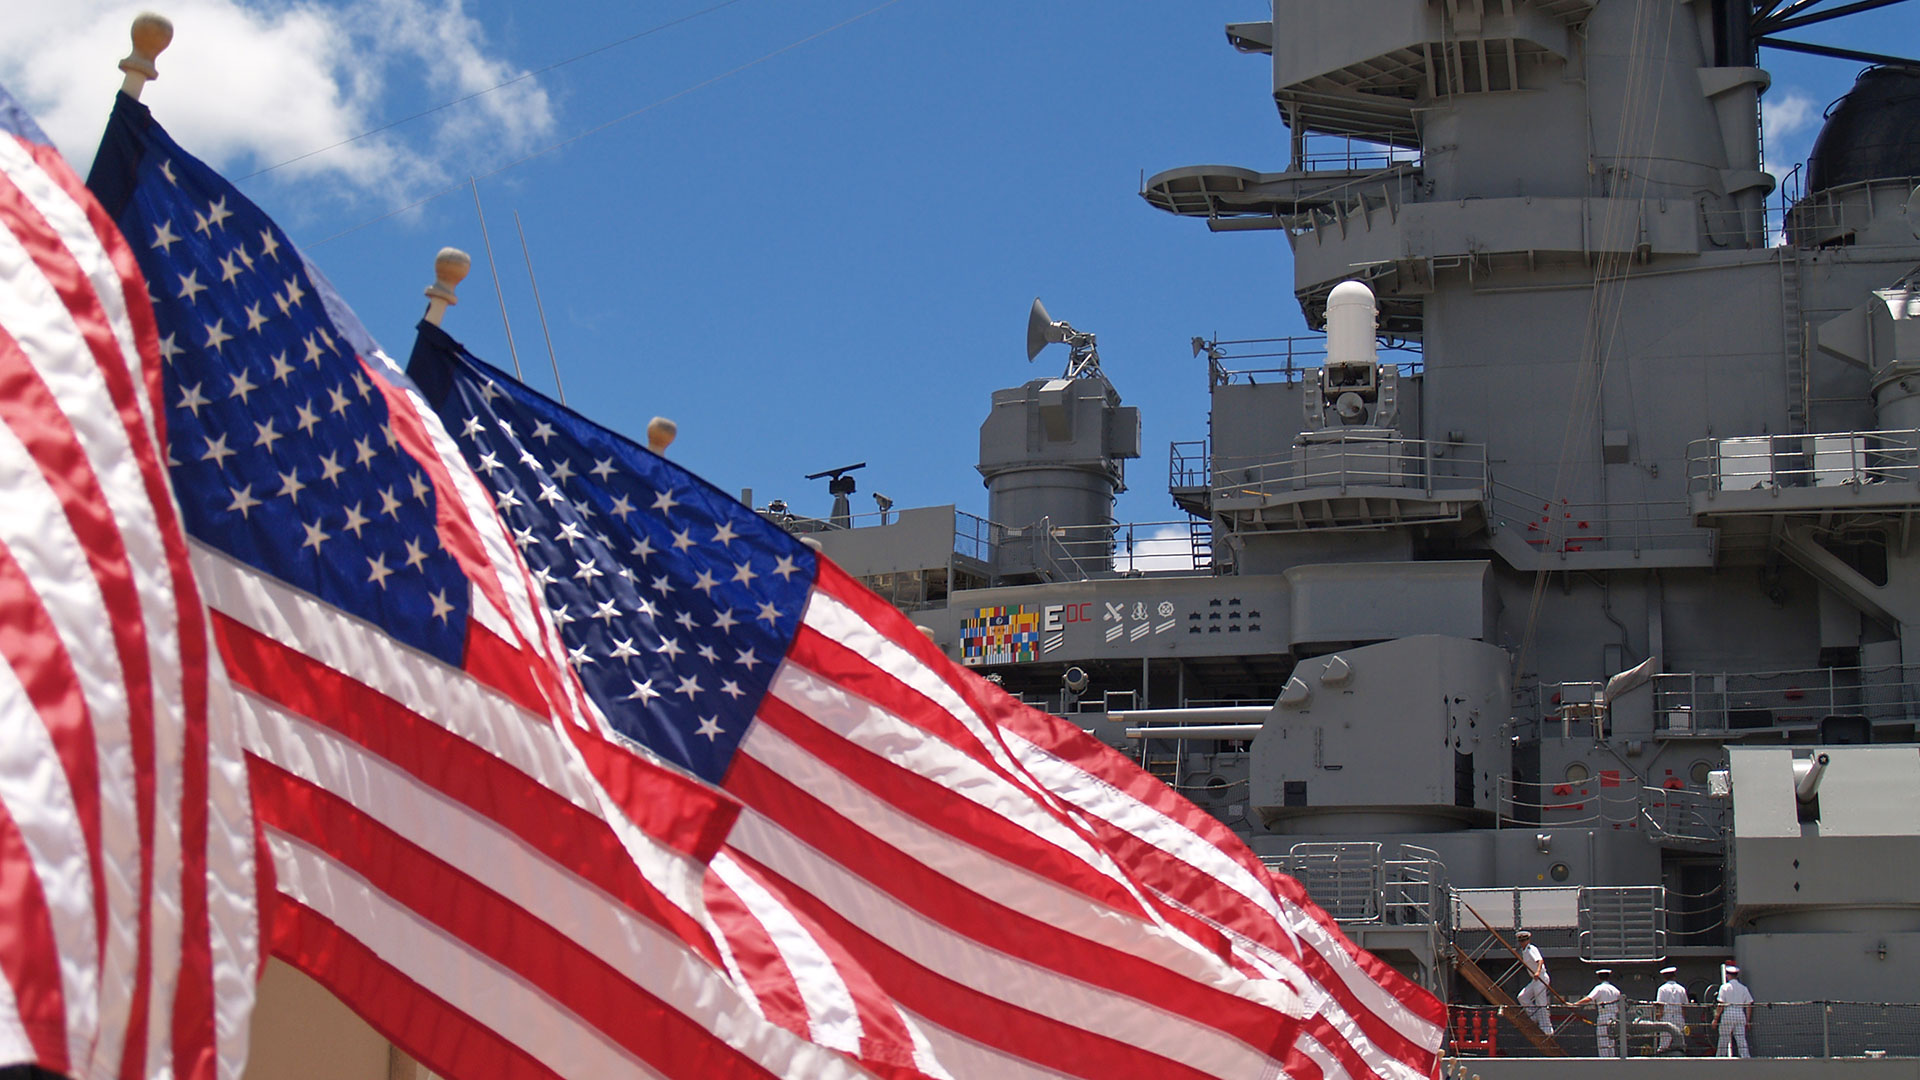 American Flag with Navy Ship